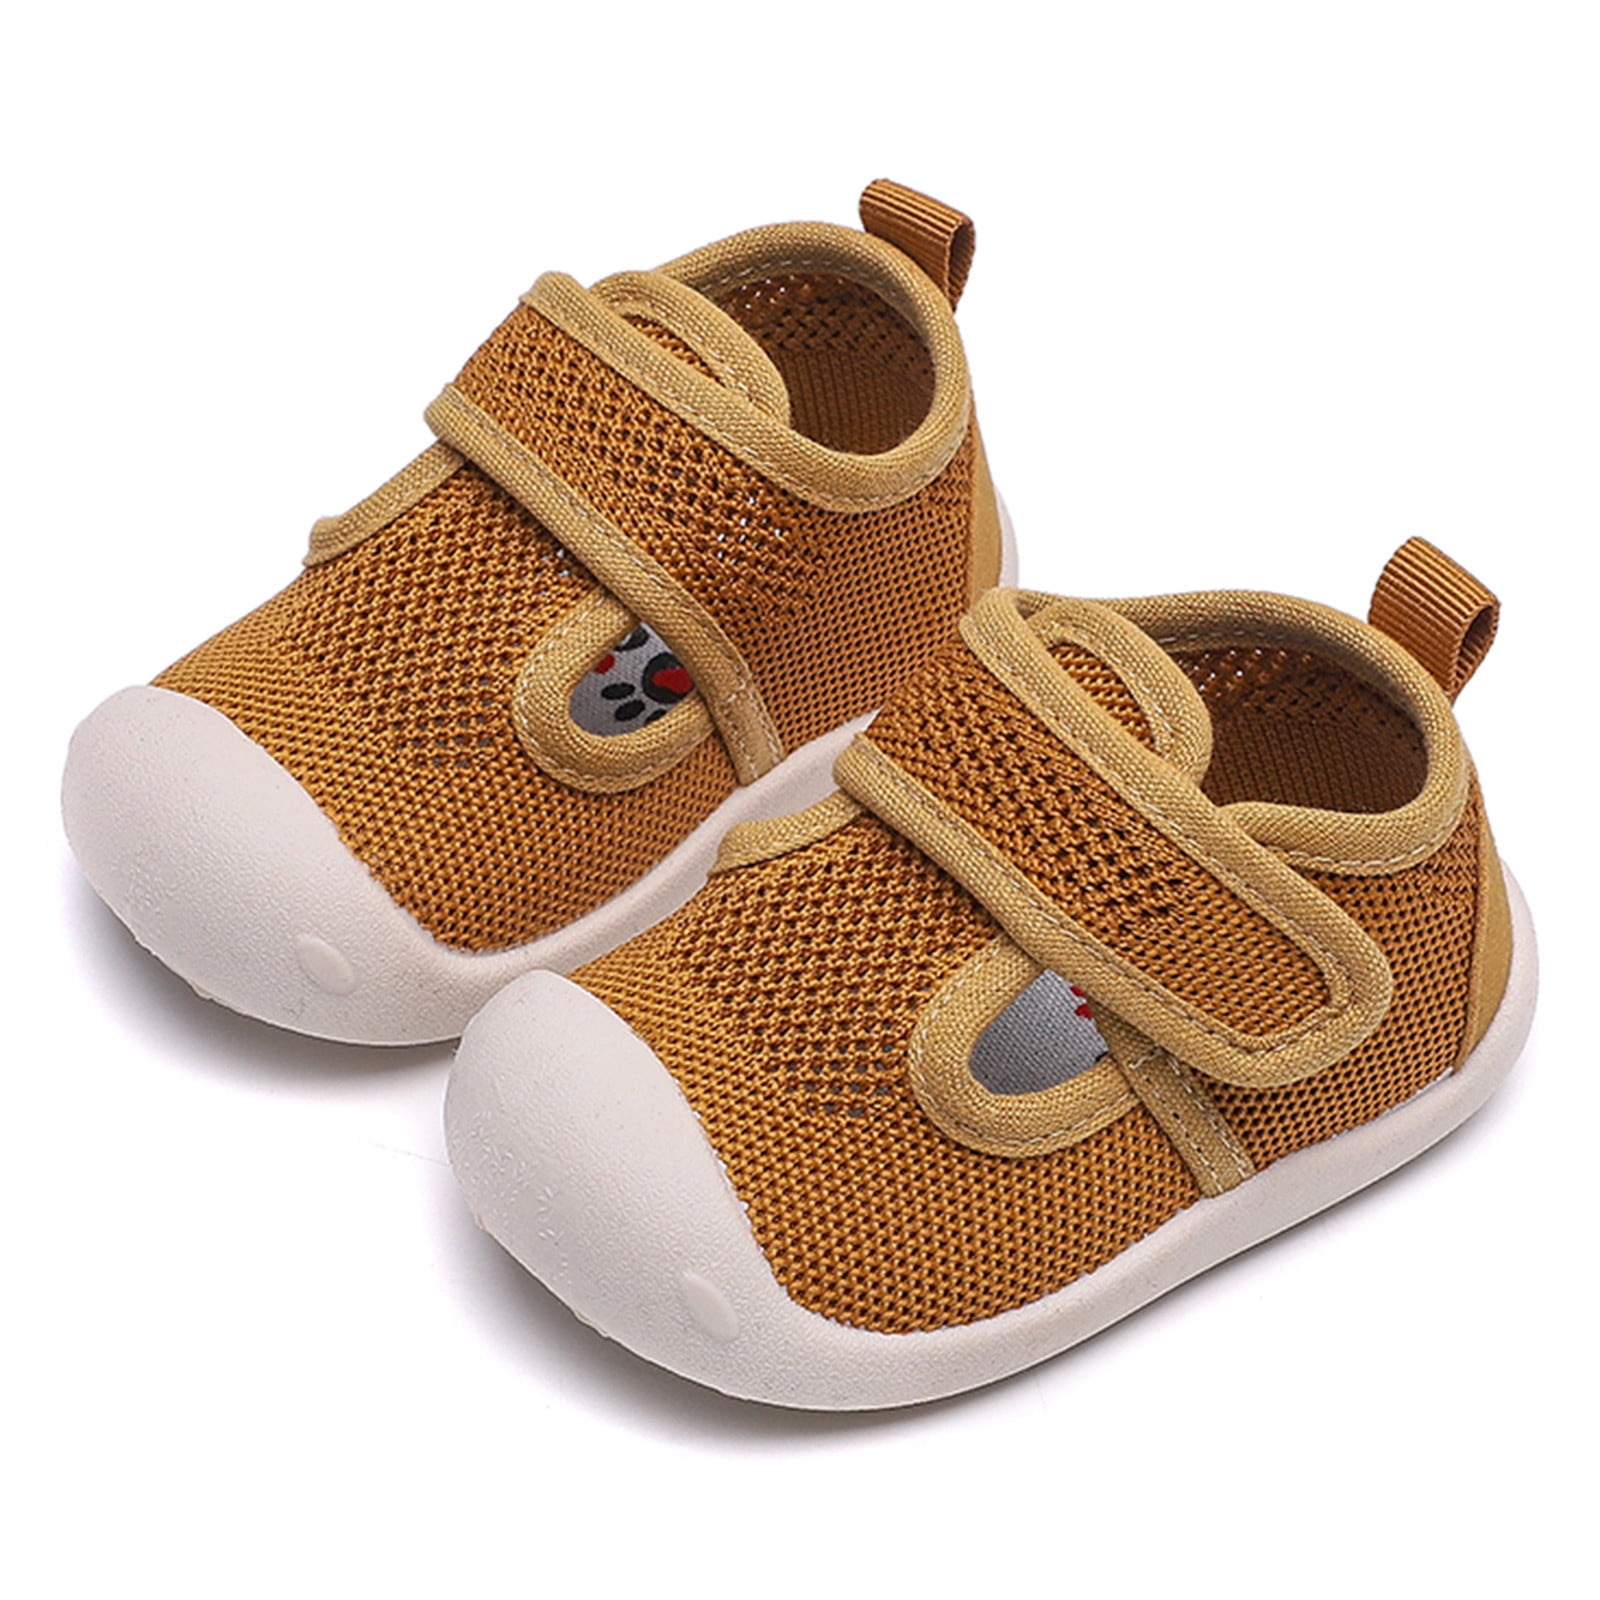 Toddler Infant Kids Shoes Baby Girl&Boys Mesh Running Sport Shoes Sneakers 